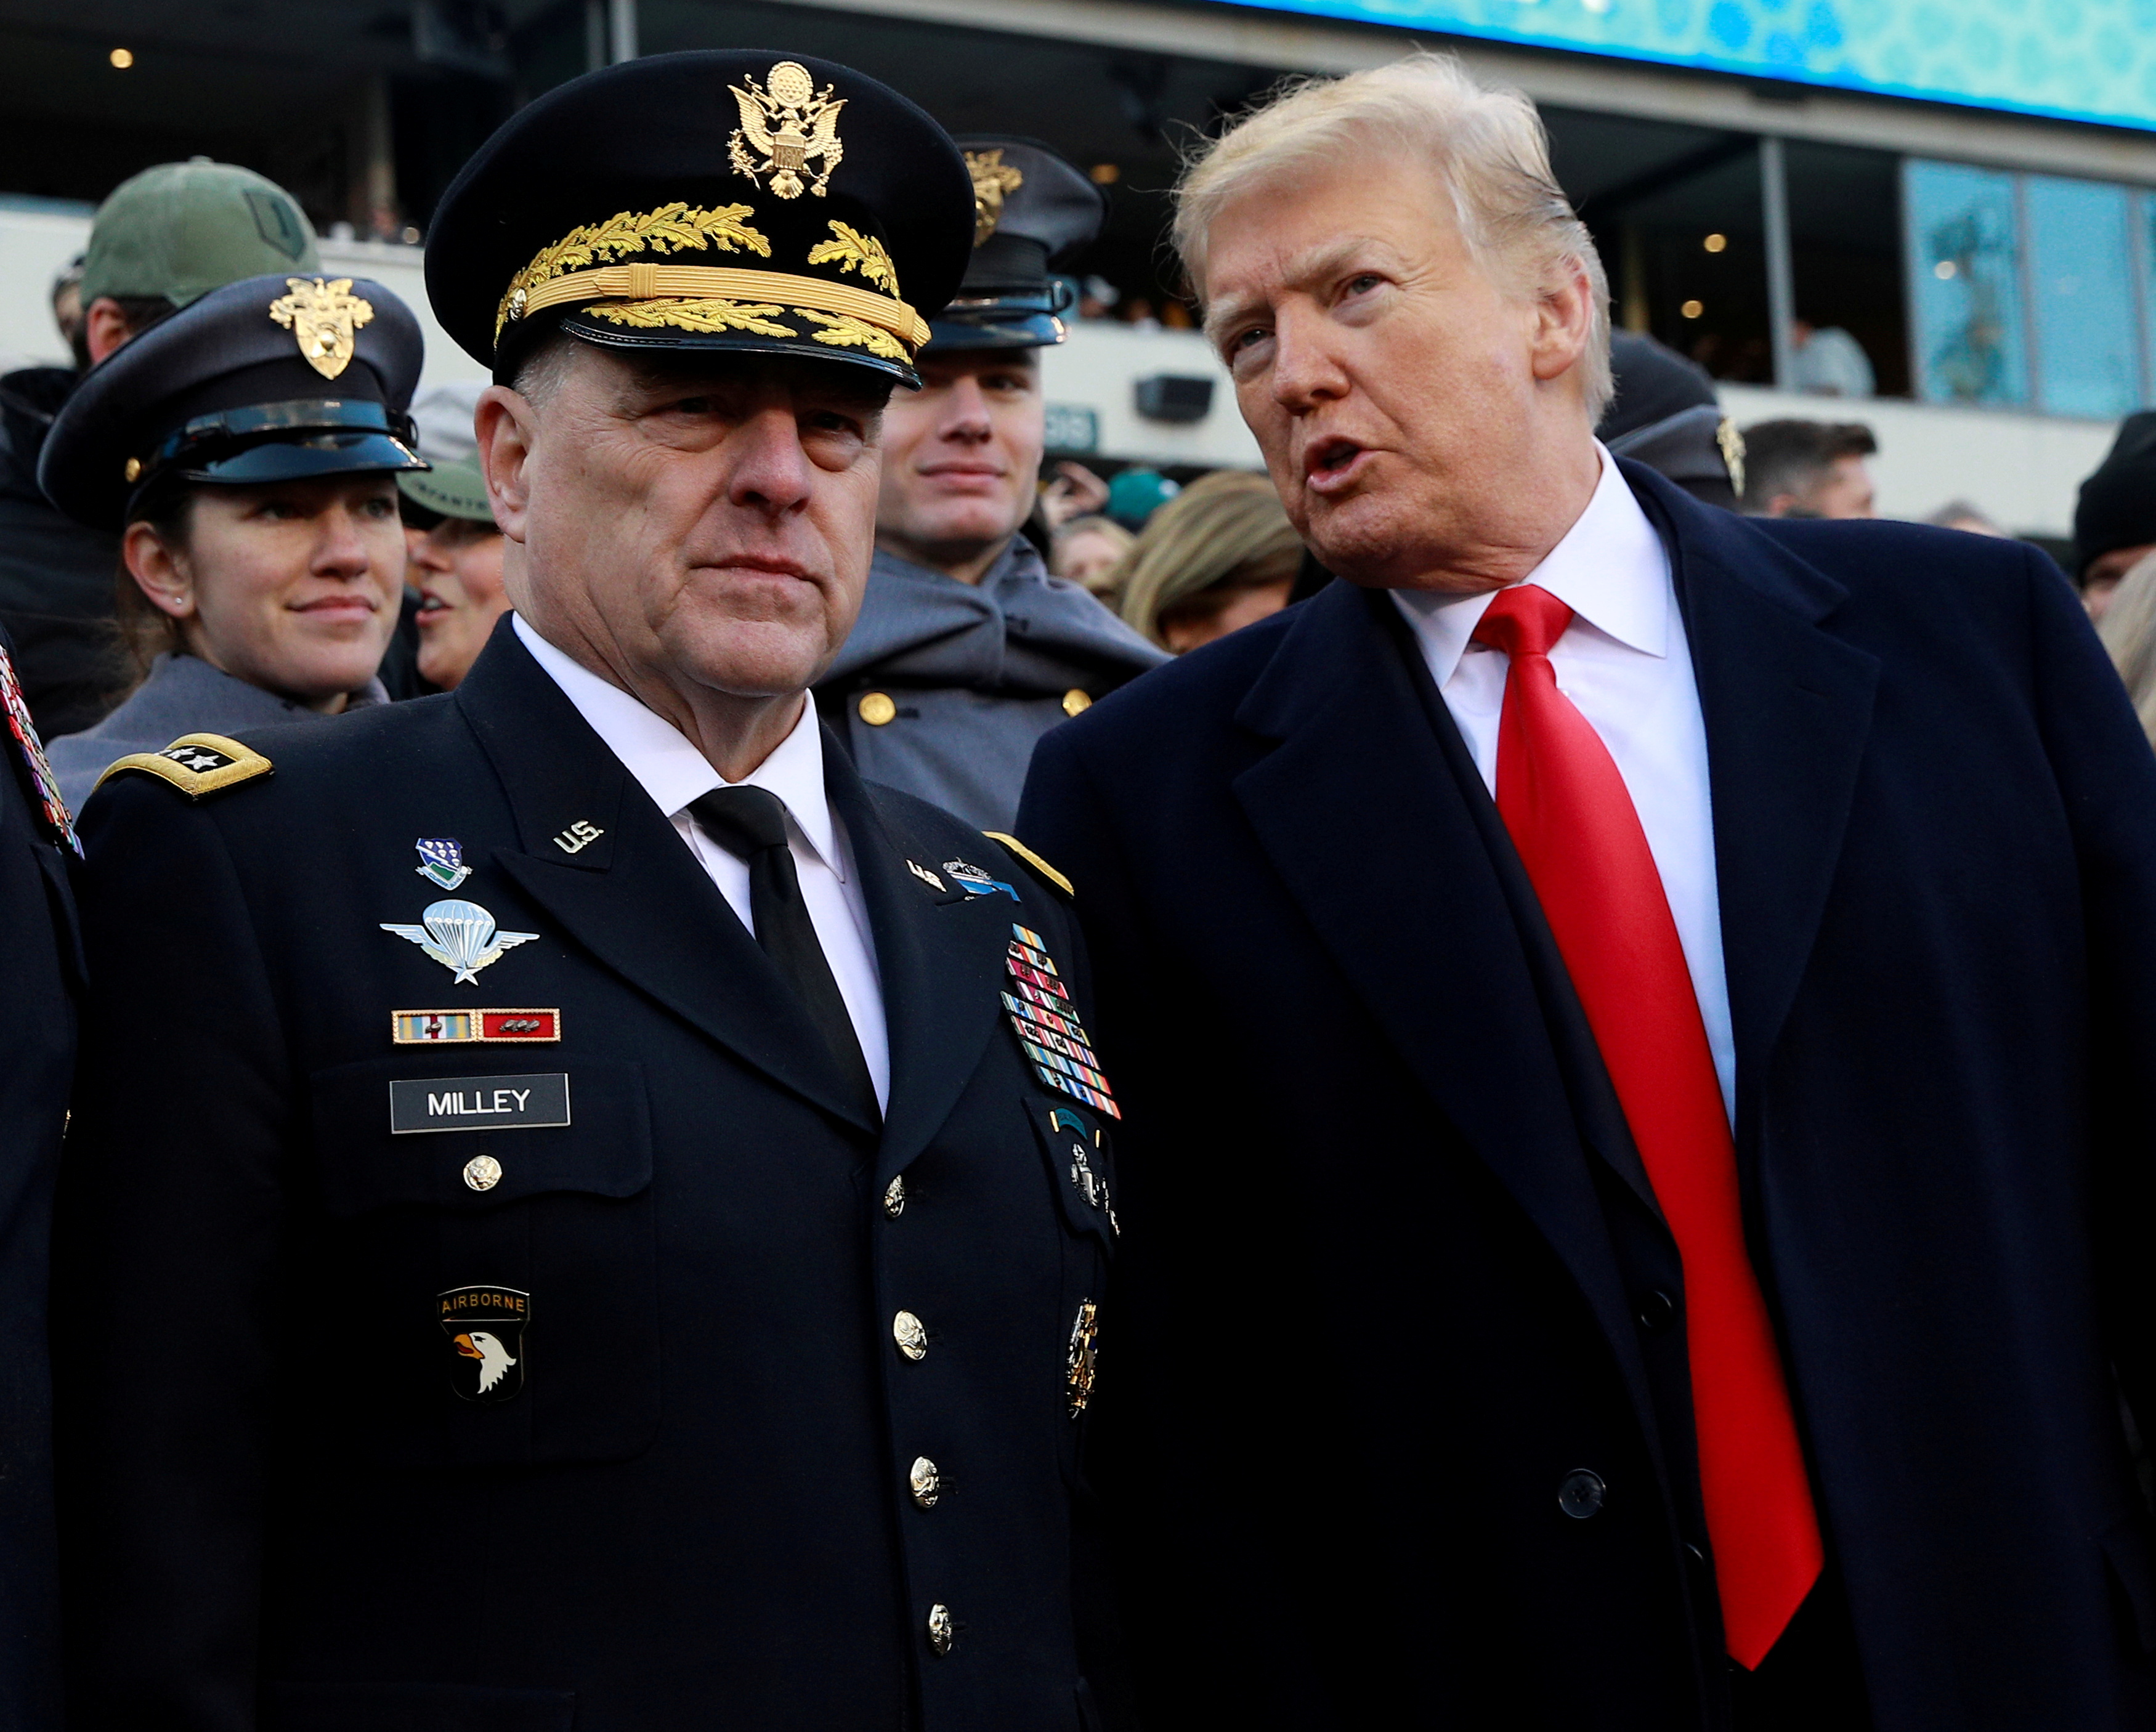 U.S. President Trump and Gen. Mark Milley, Chief of Staff of the United States Army speak at the 119th U.S. Army-Navy football game in Philadelphia